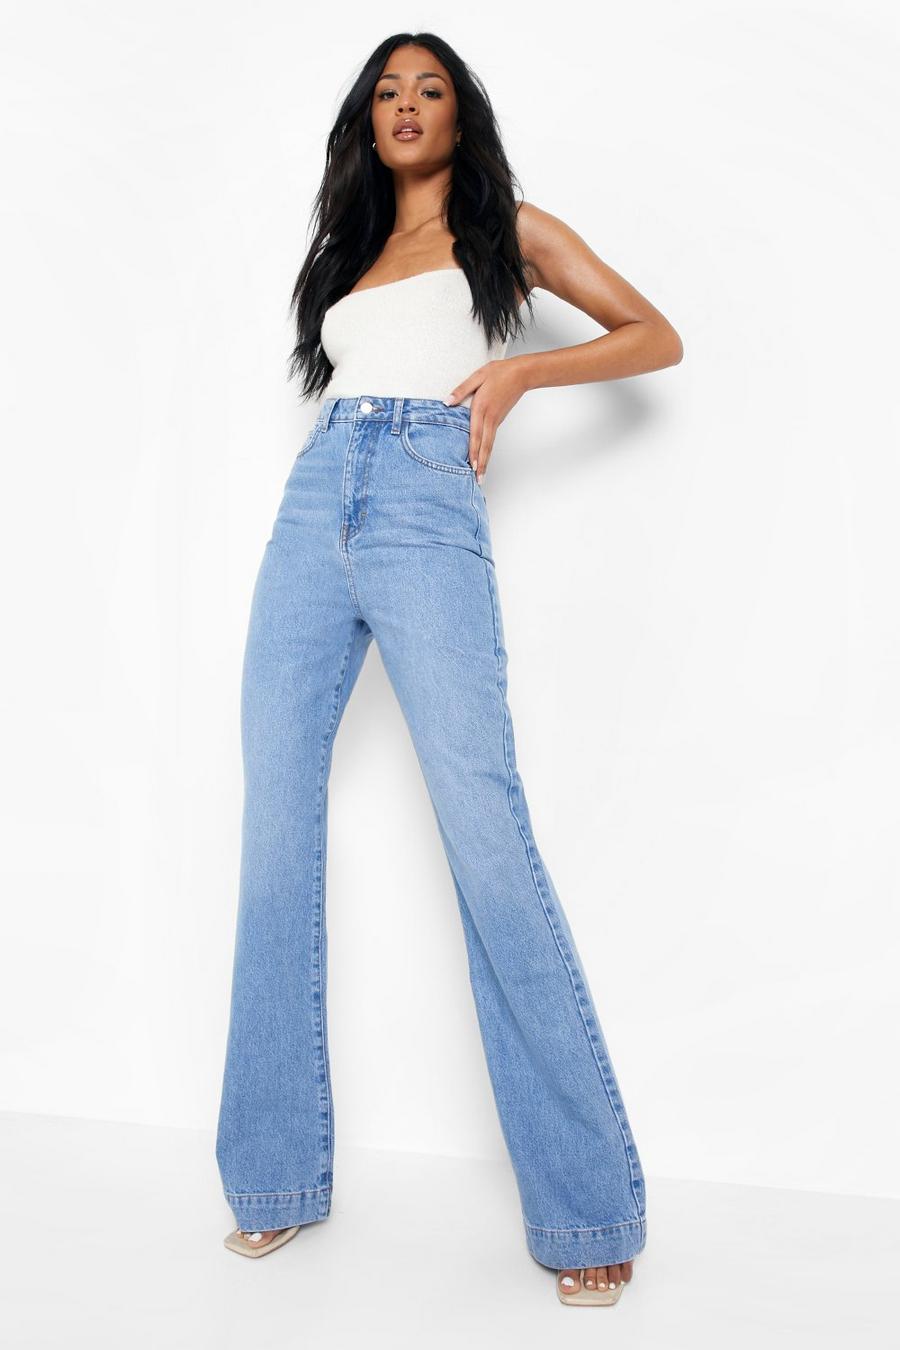 Flare For You Tall High Waisted Flared Leg Jeans in Light Blue Wash